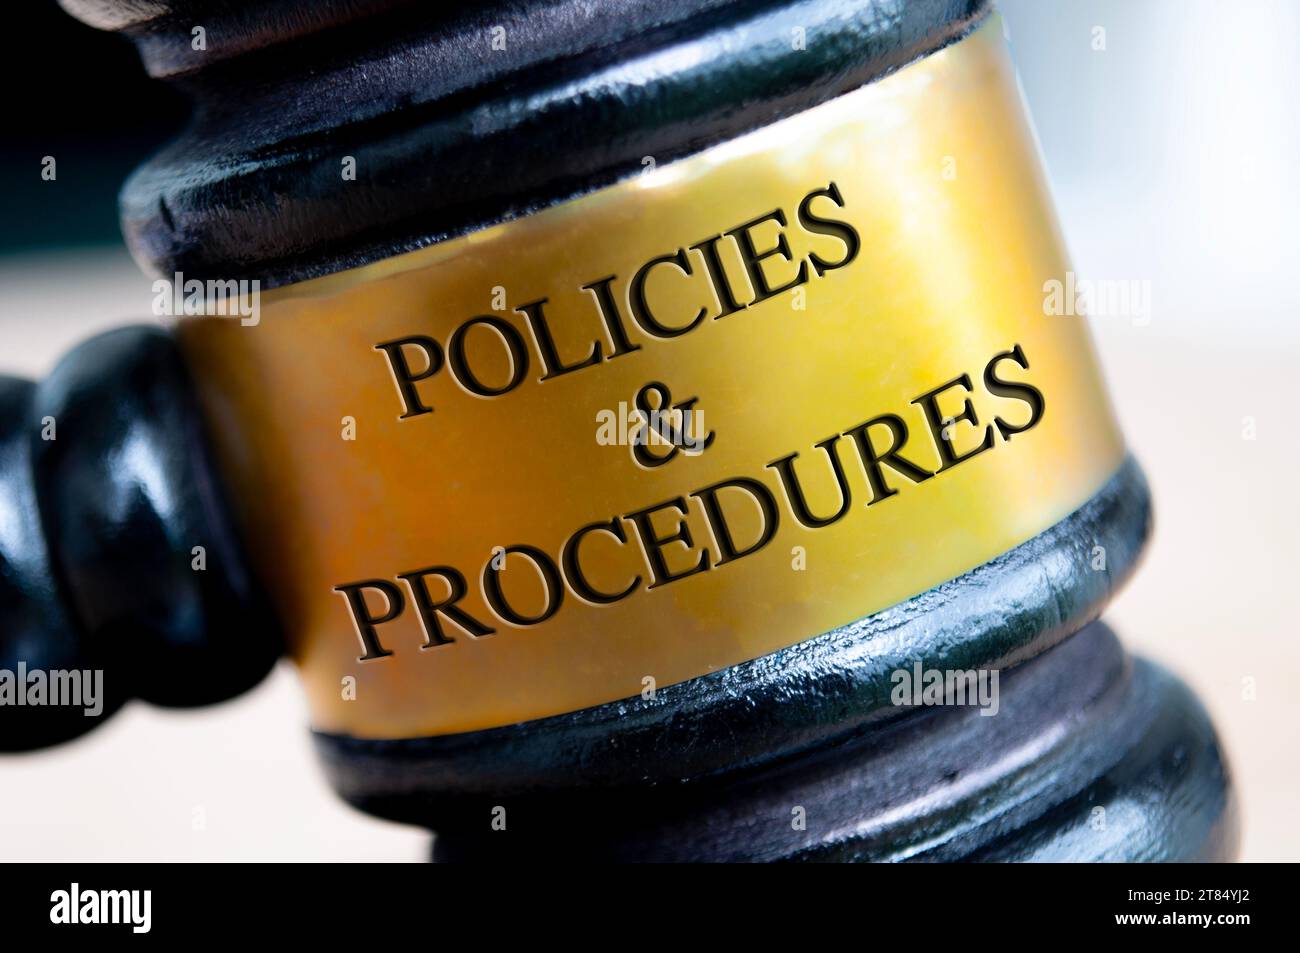 Policies and Procedures text engraved on gavel. Policies and procedures concepts Stock Photo